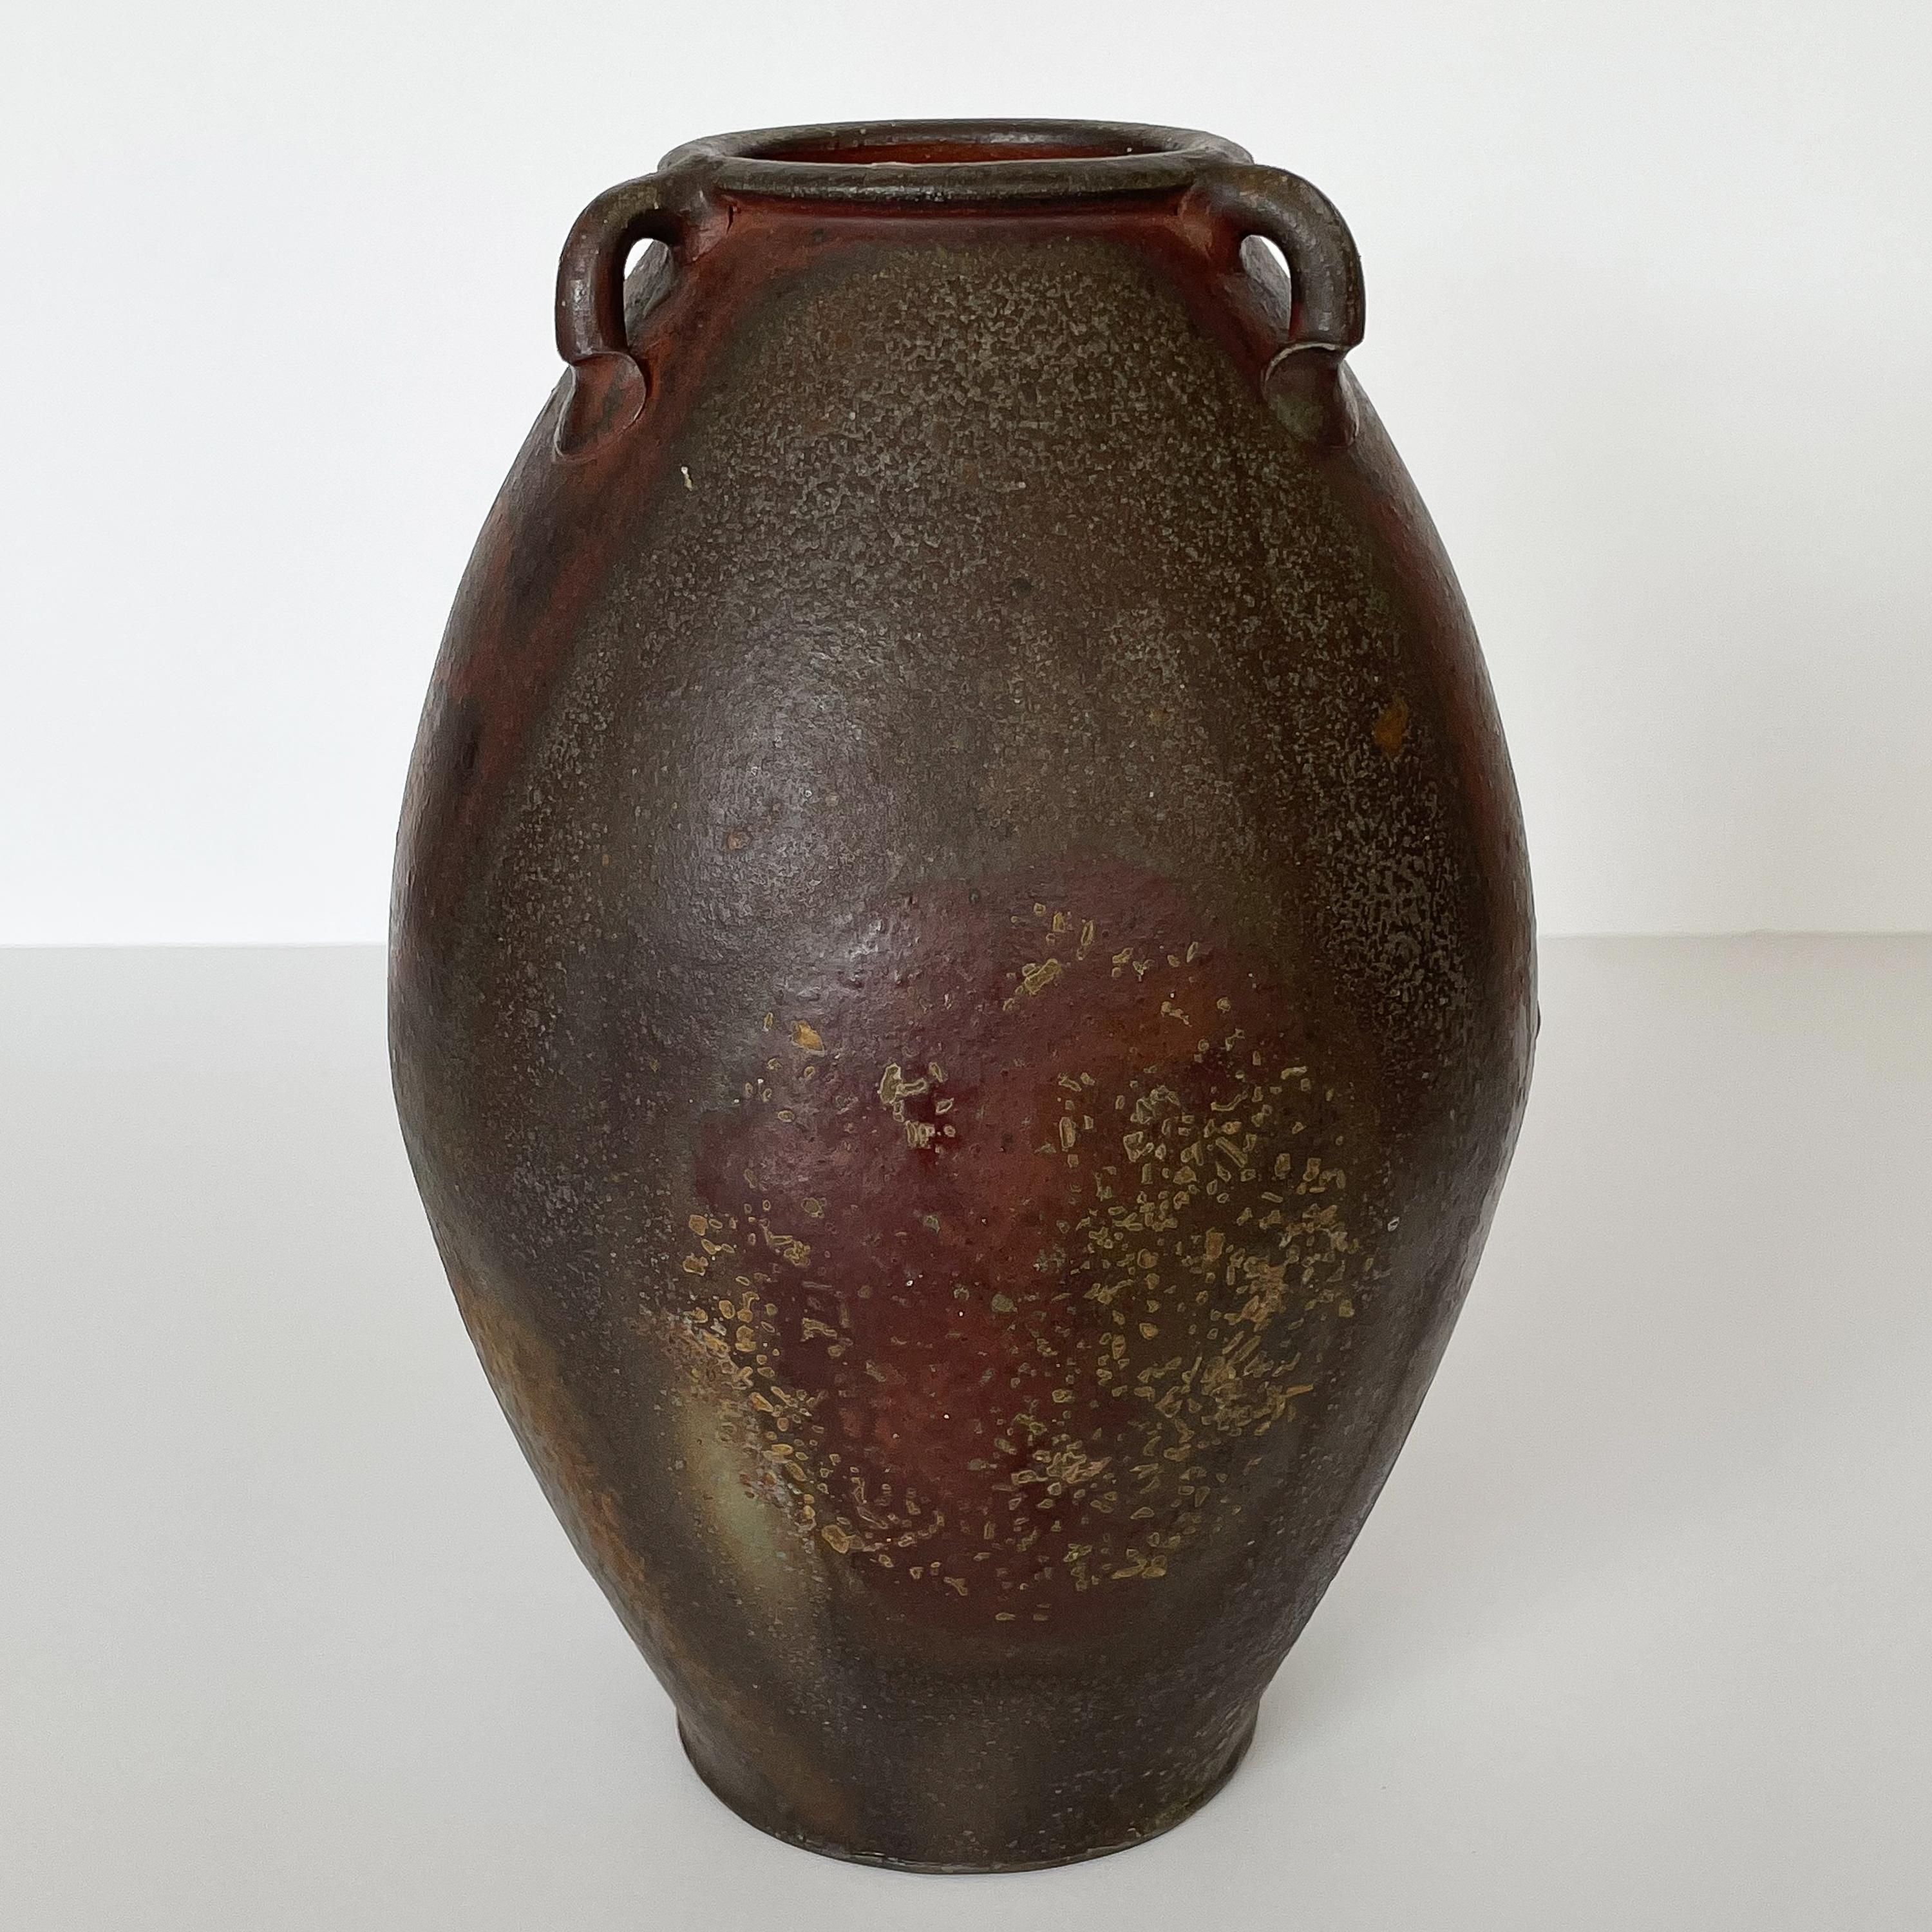 A beautiful woodfired studio pottery vase by a North Carolina artisan, circa 2020. Hand thrown stoneware vessel / amphora with three handles. Woodfired for three days with oyster shells to create a natural dramatic glaze in earth tones and rust red.